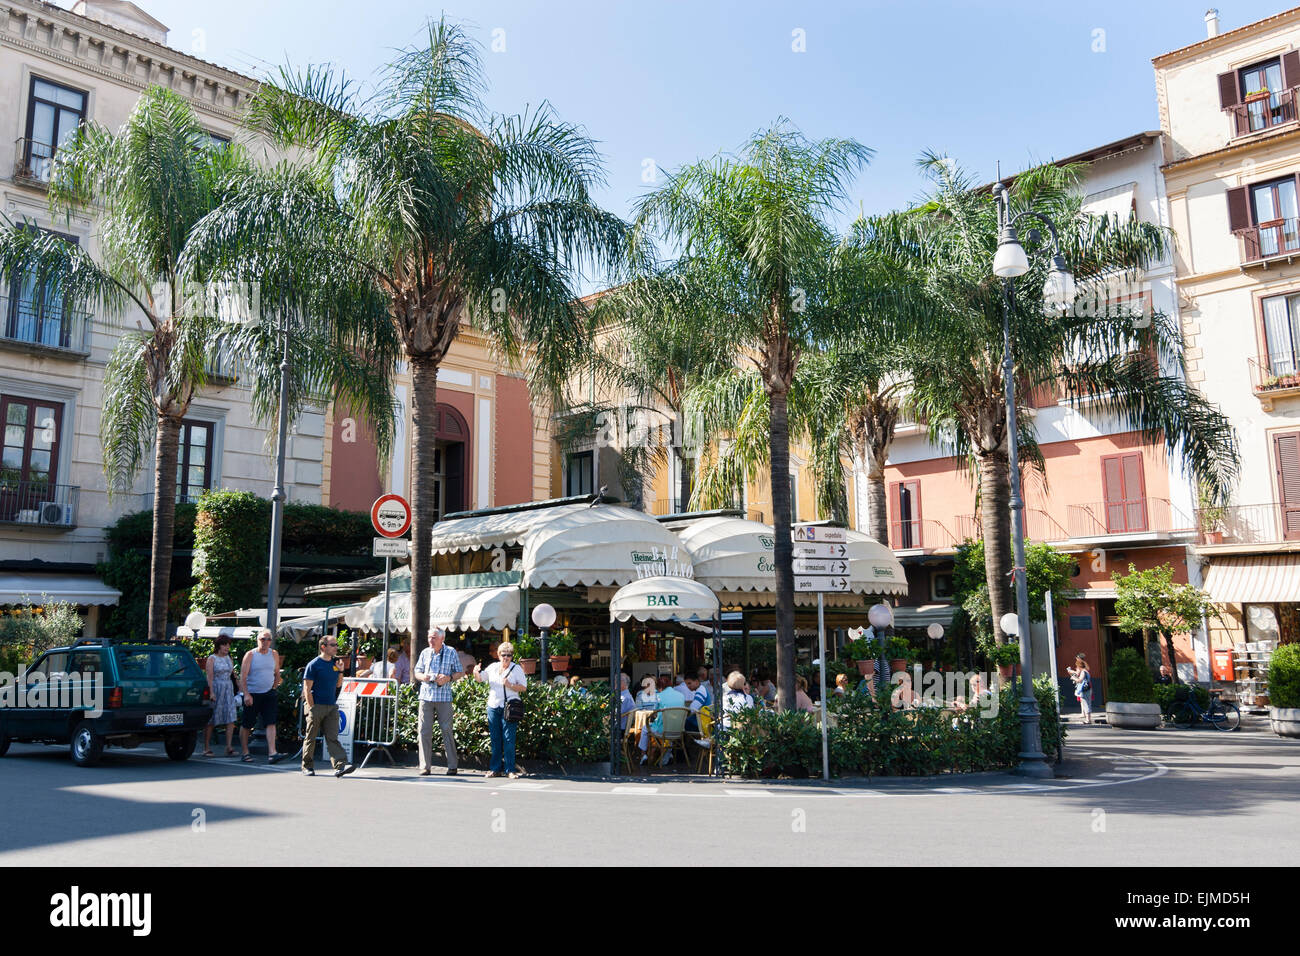 View of the Bar Ercolano in Piazza Tassa, Sorrento.  The bar is surrounded by a grove of queen palms, Syagrus romanzoffiana Stock Photo